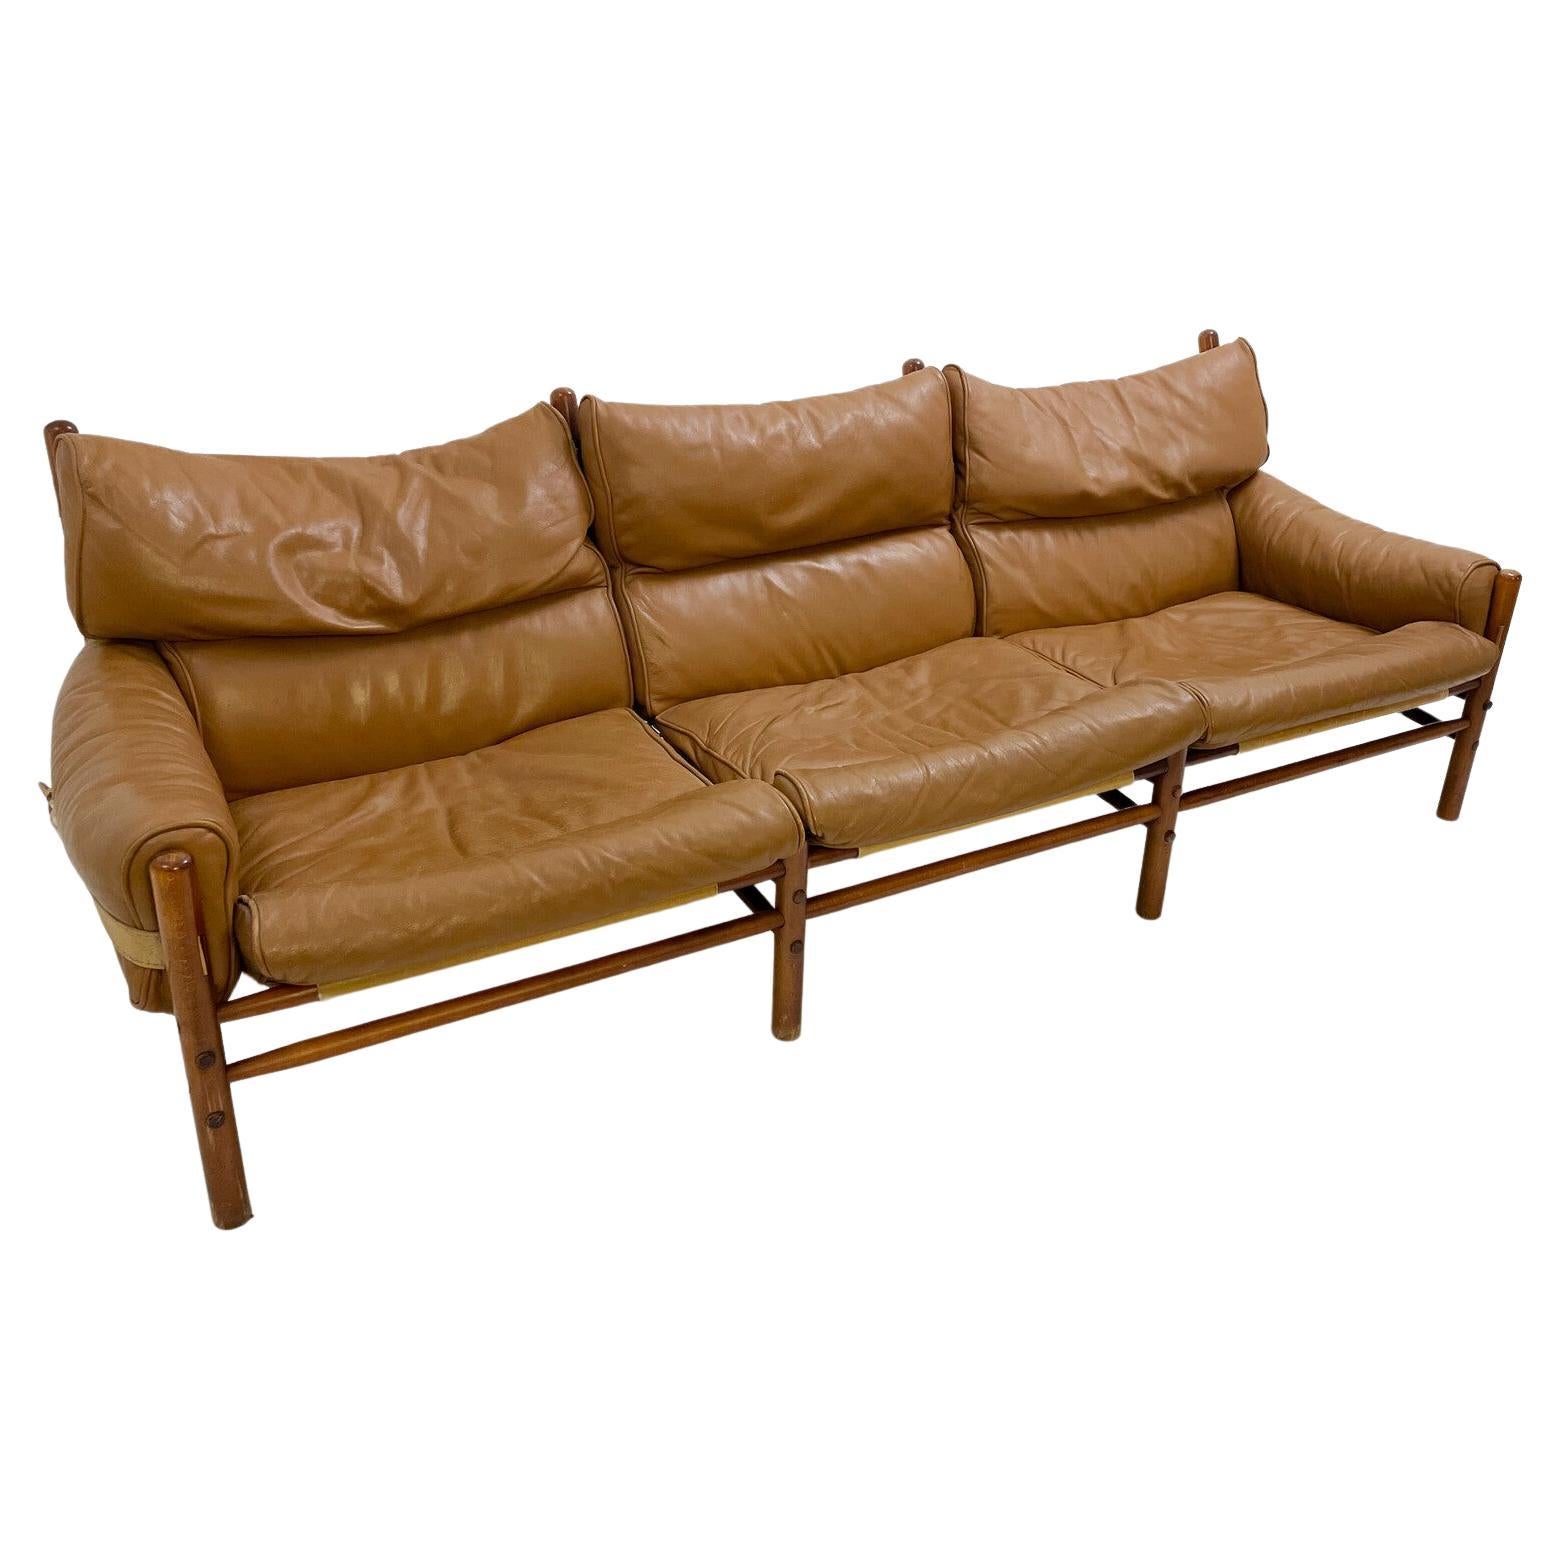 Mid-Century Modern Kontiki Three-Seater Sofa by Arne Norell, Sweden, 1960s For Sale